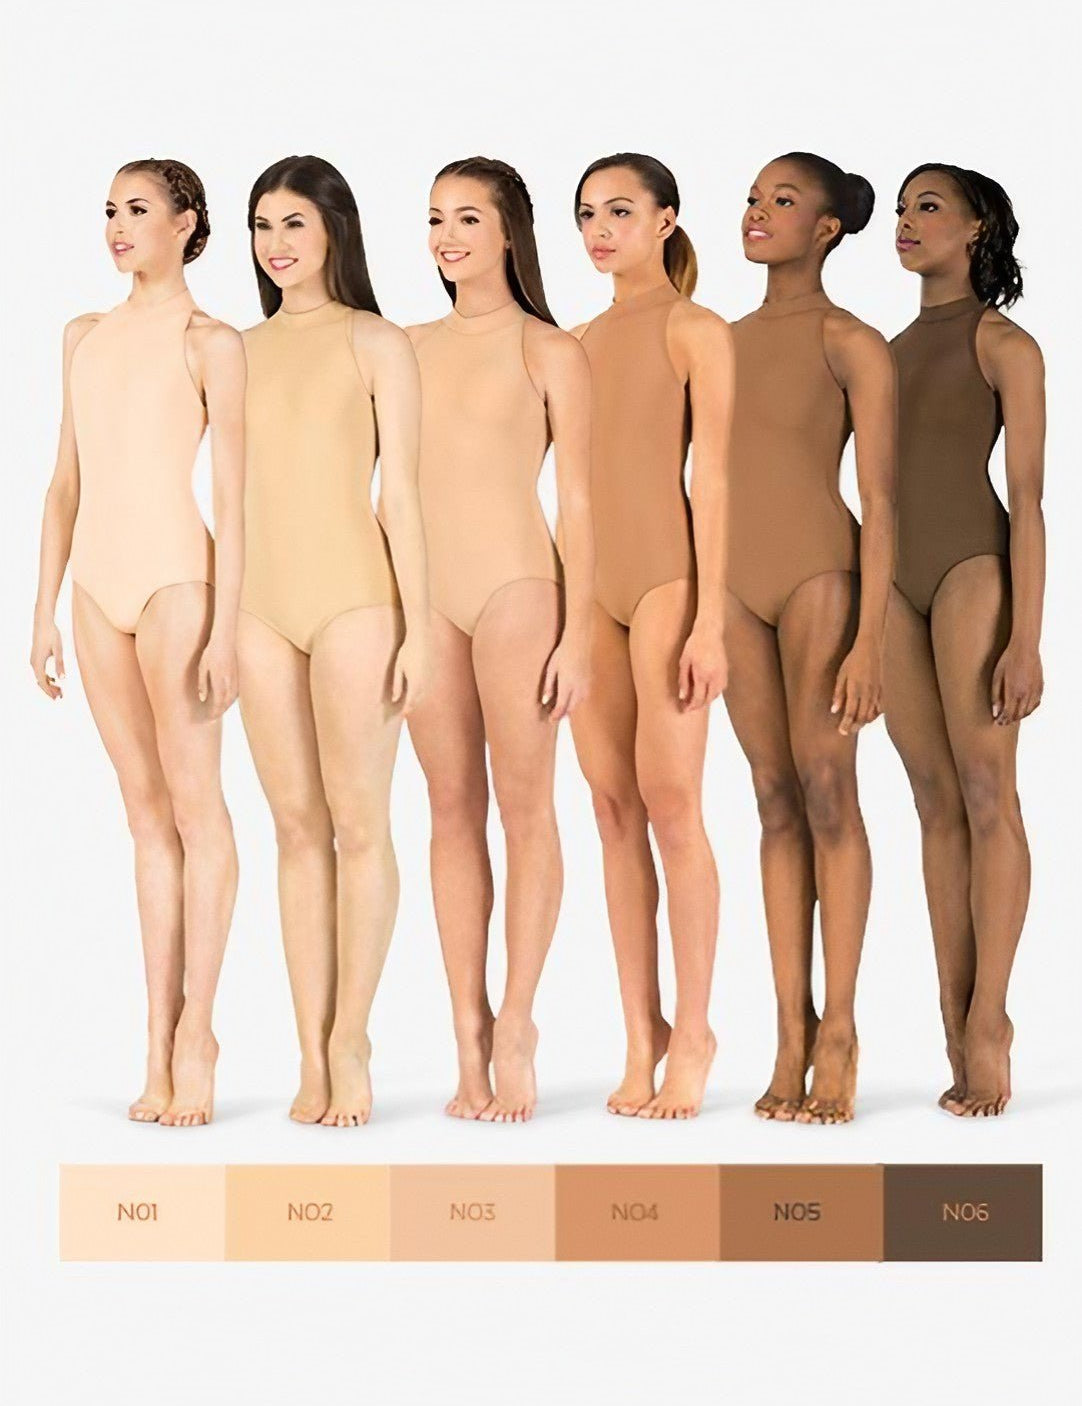 A group of women modeling high neck tank leotards in various nude skin tone colors